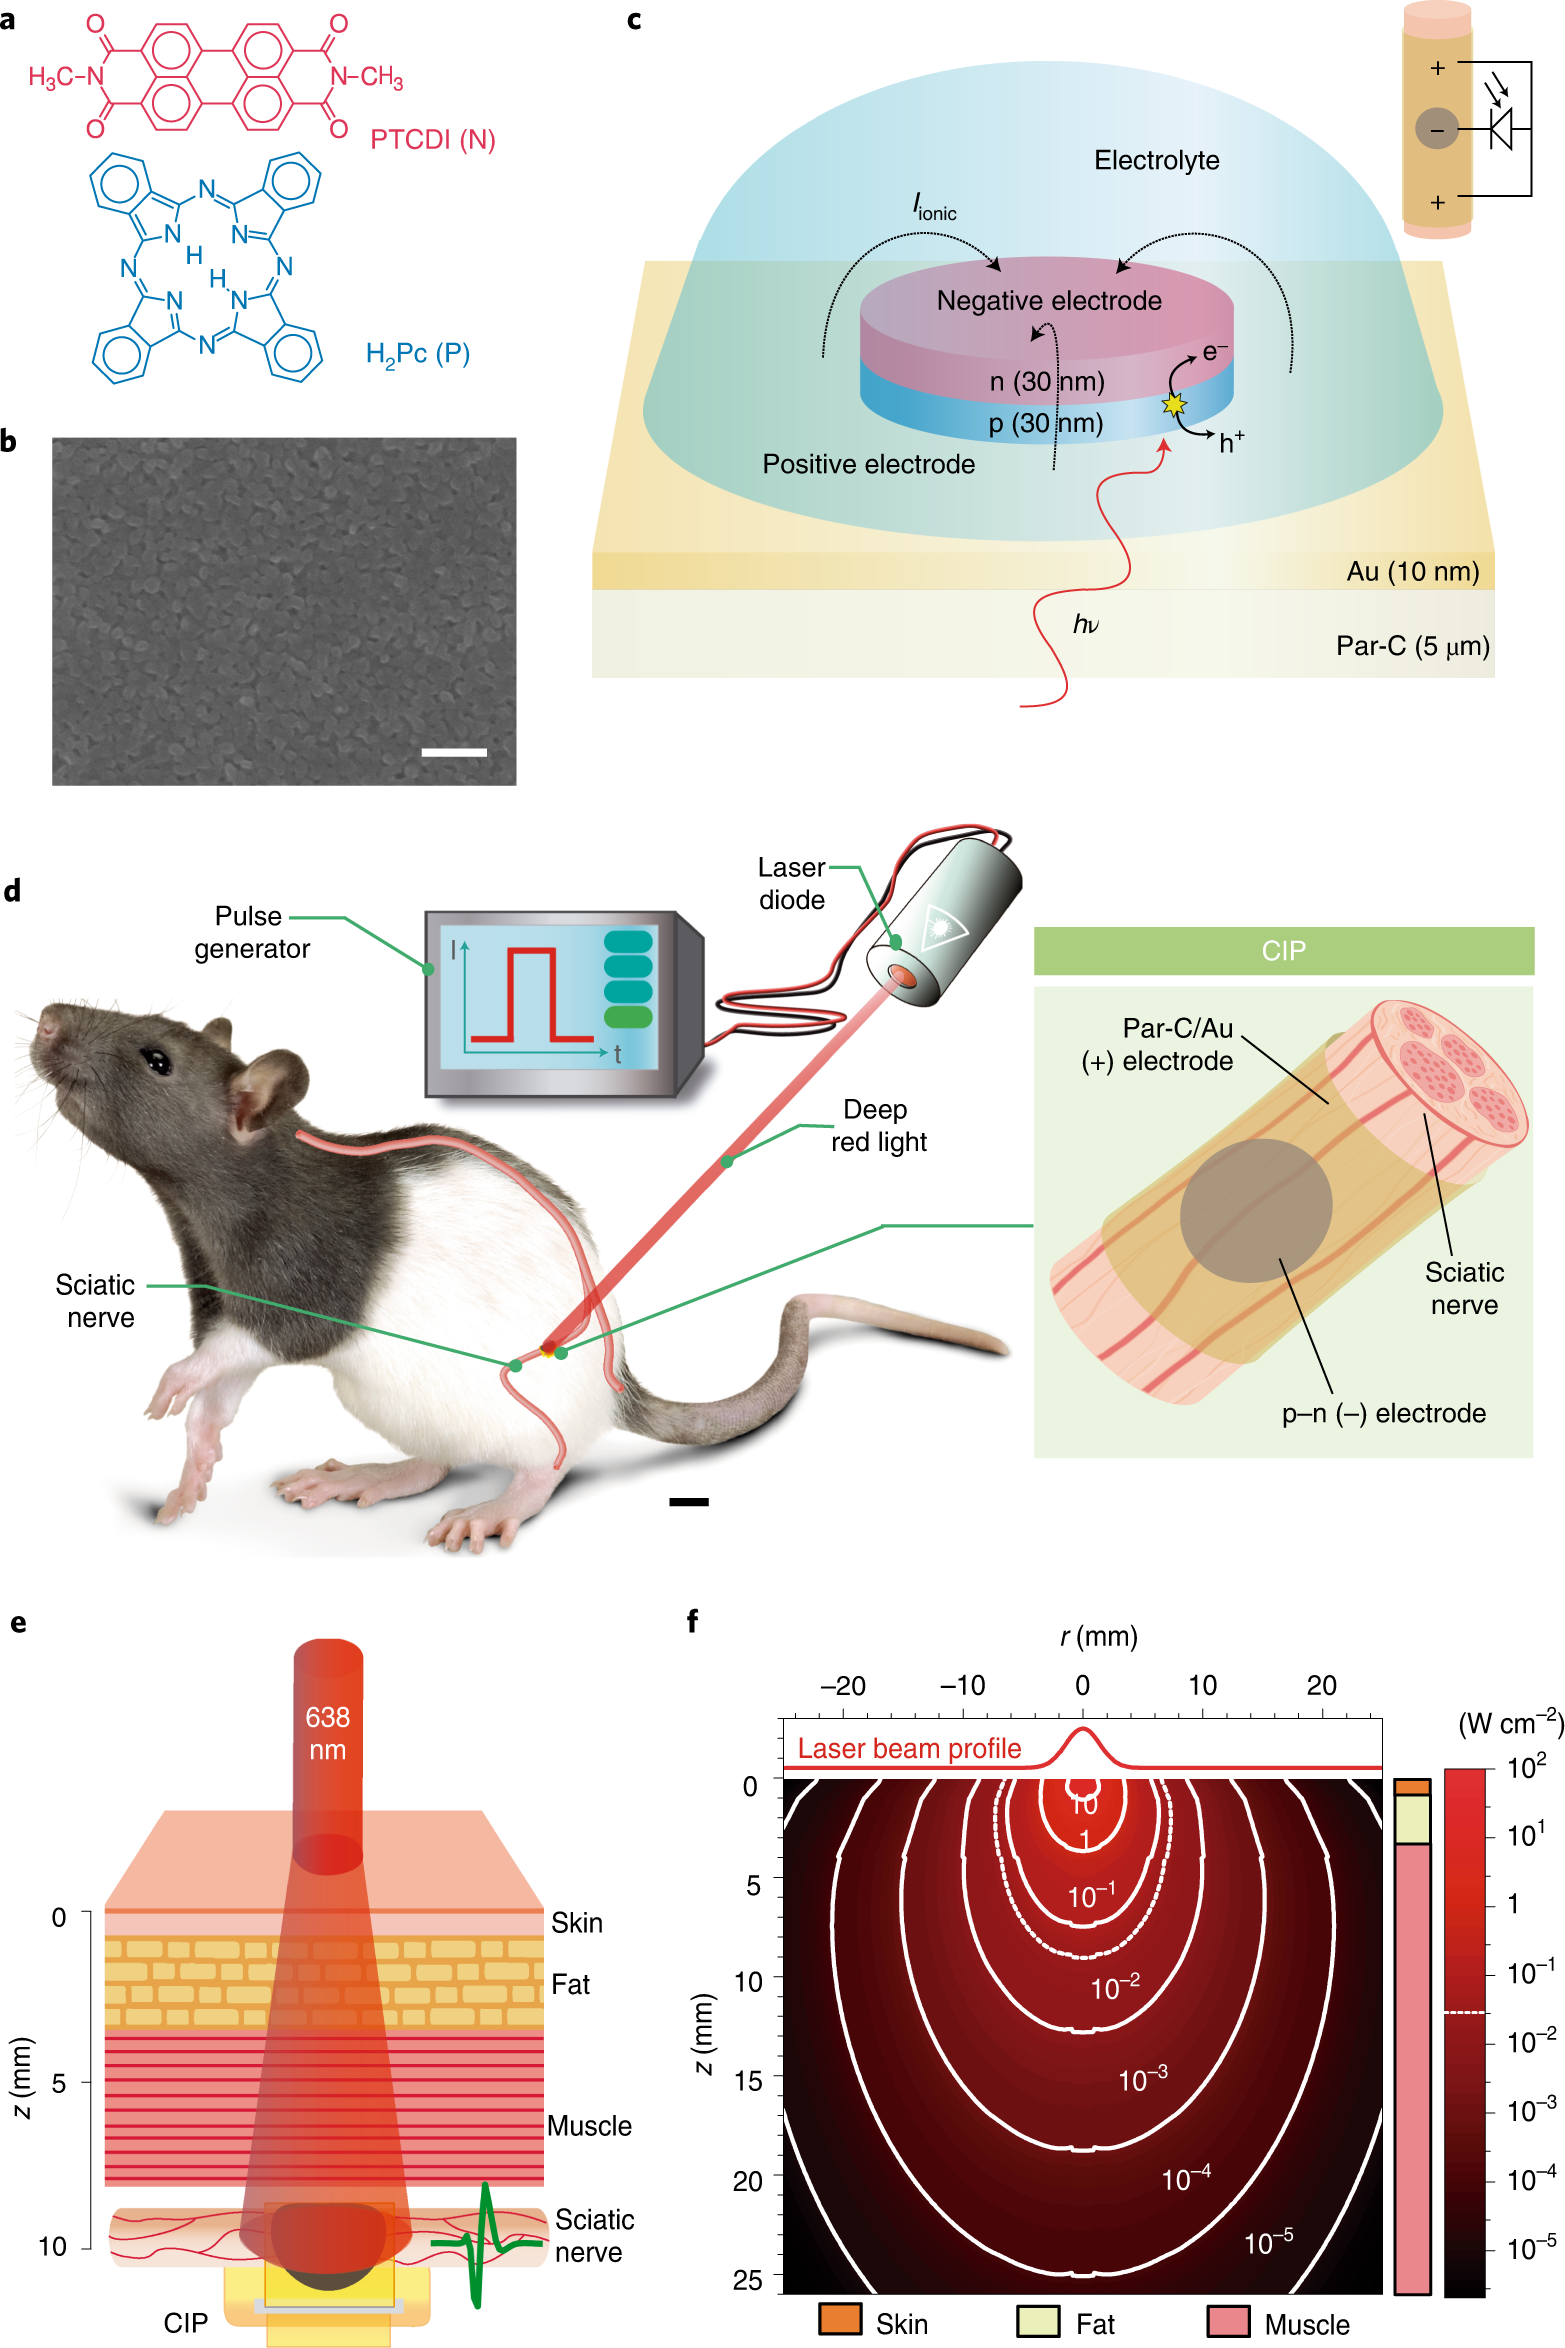 Chronic electrical stimulation of peripheral nerves via deep-red